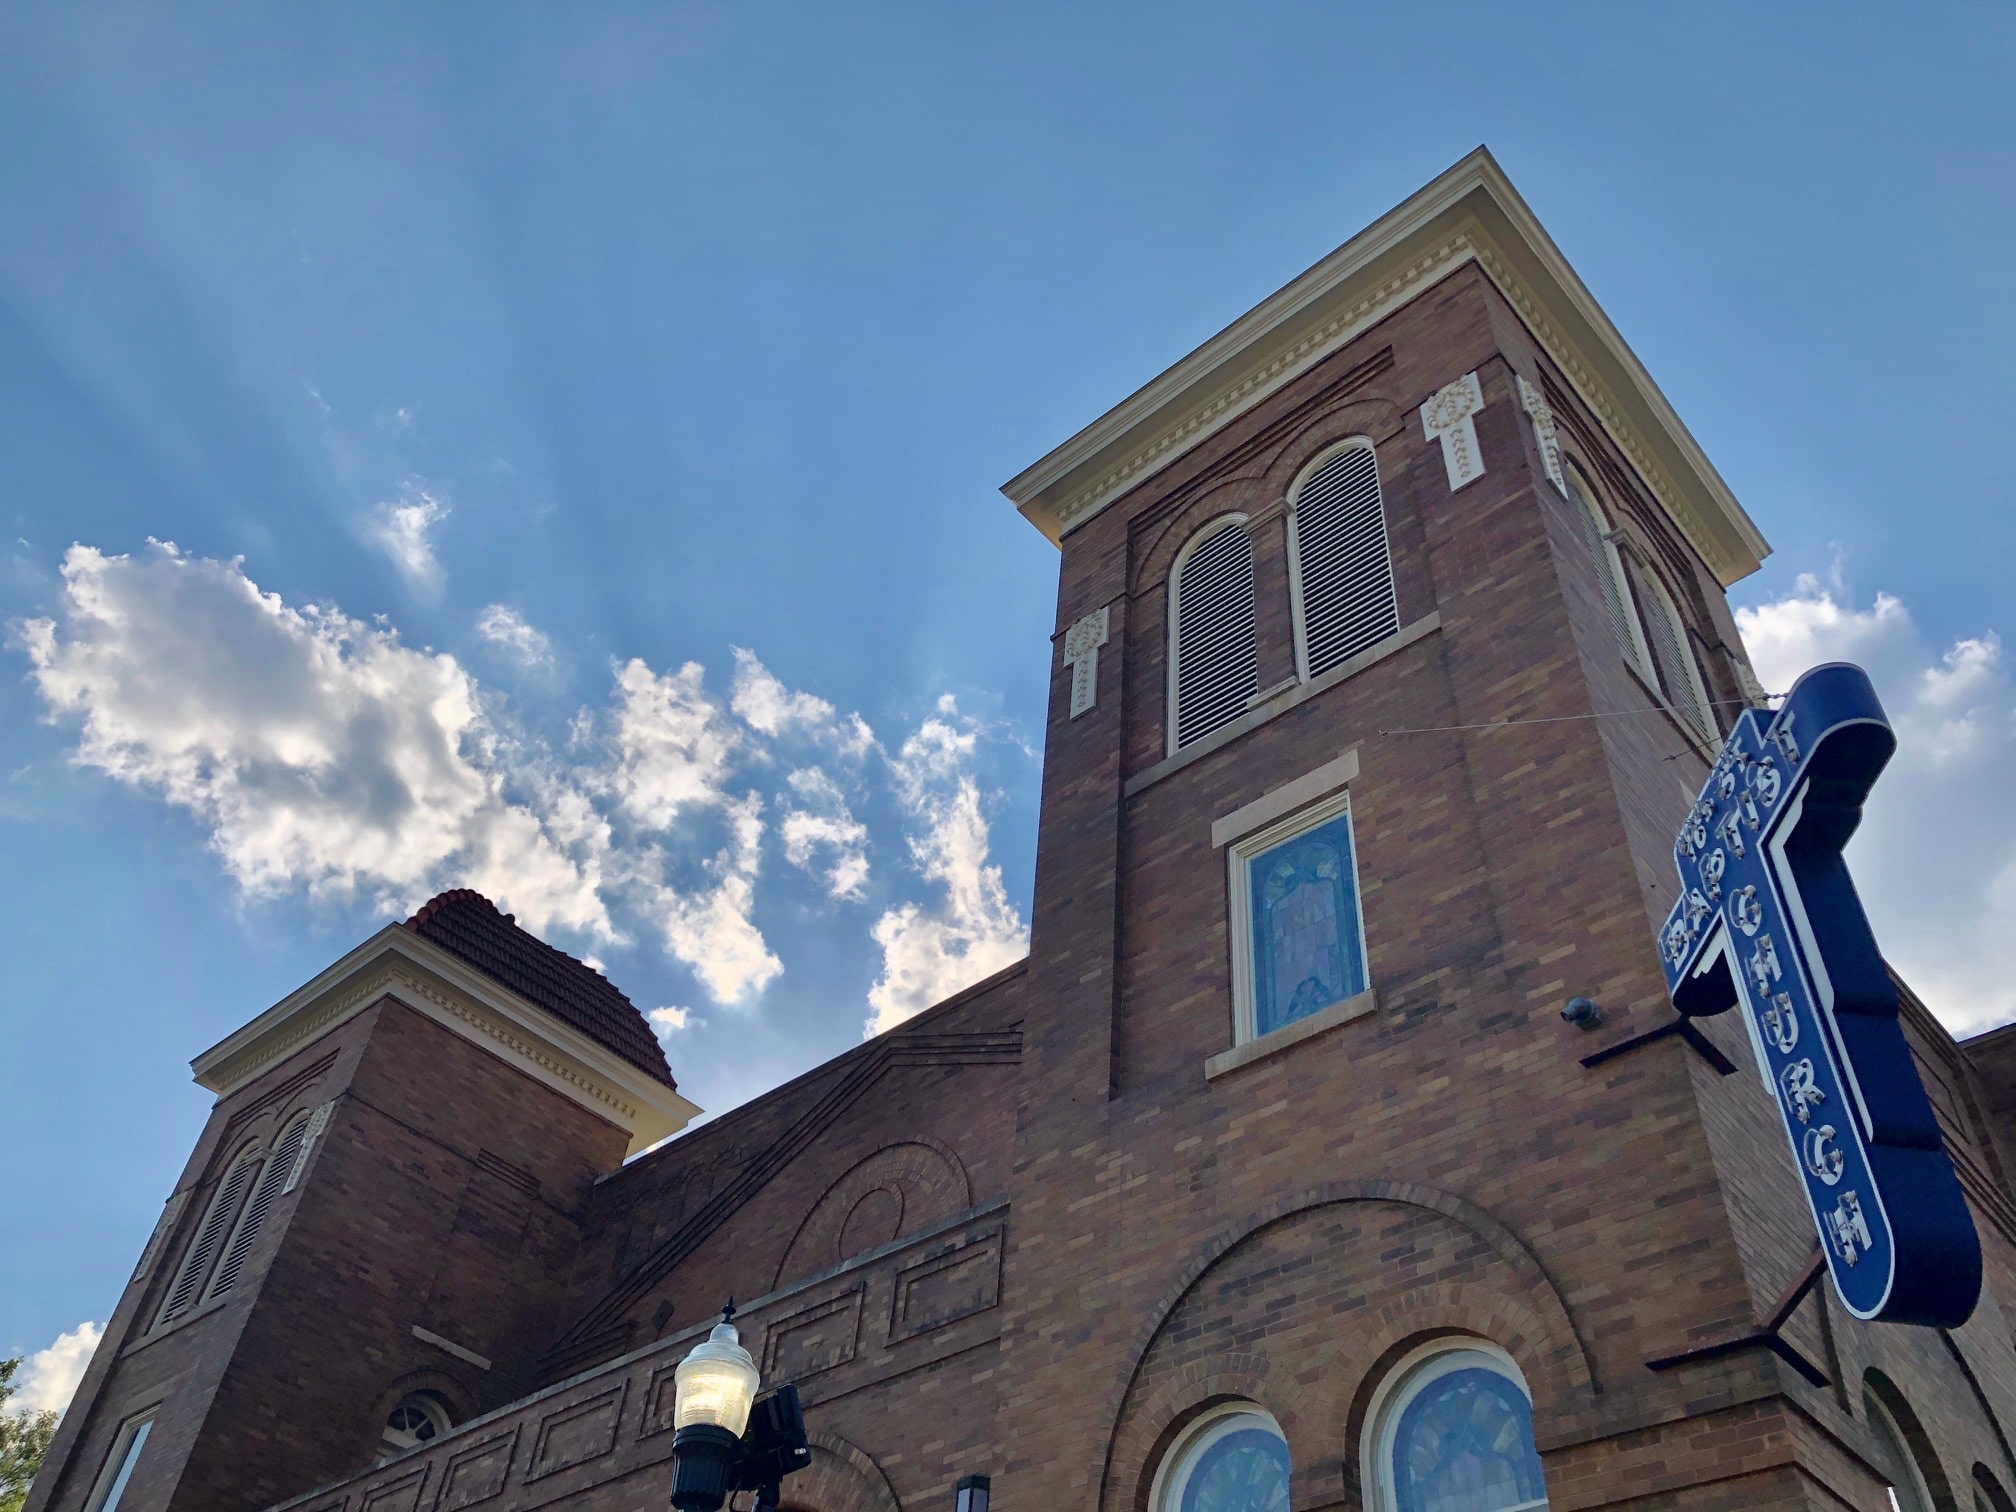 16th Street Baptist Church sky New exhibits coming to 16th Street Baptist Church, plus update on the Civil Rights National Monument